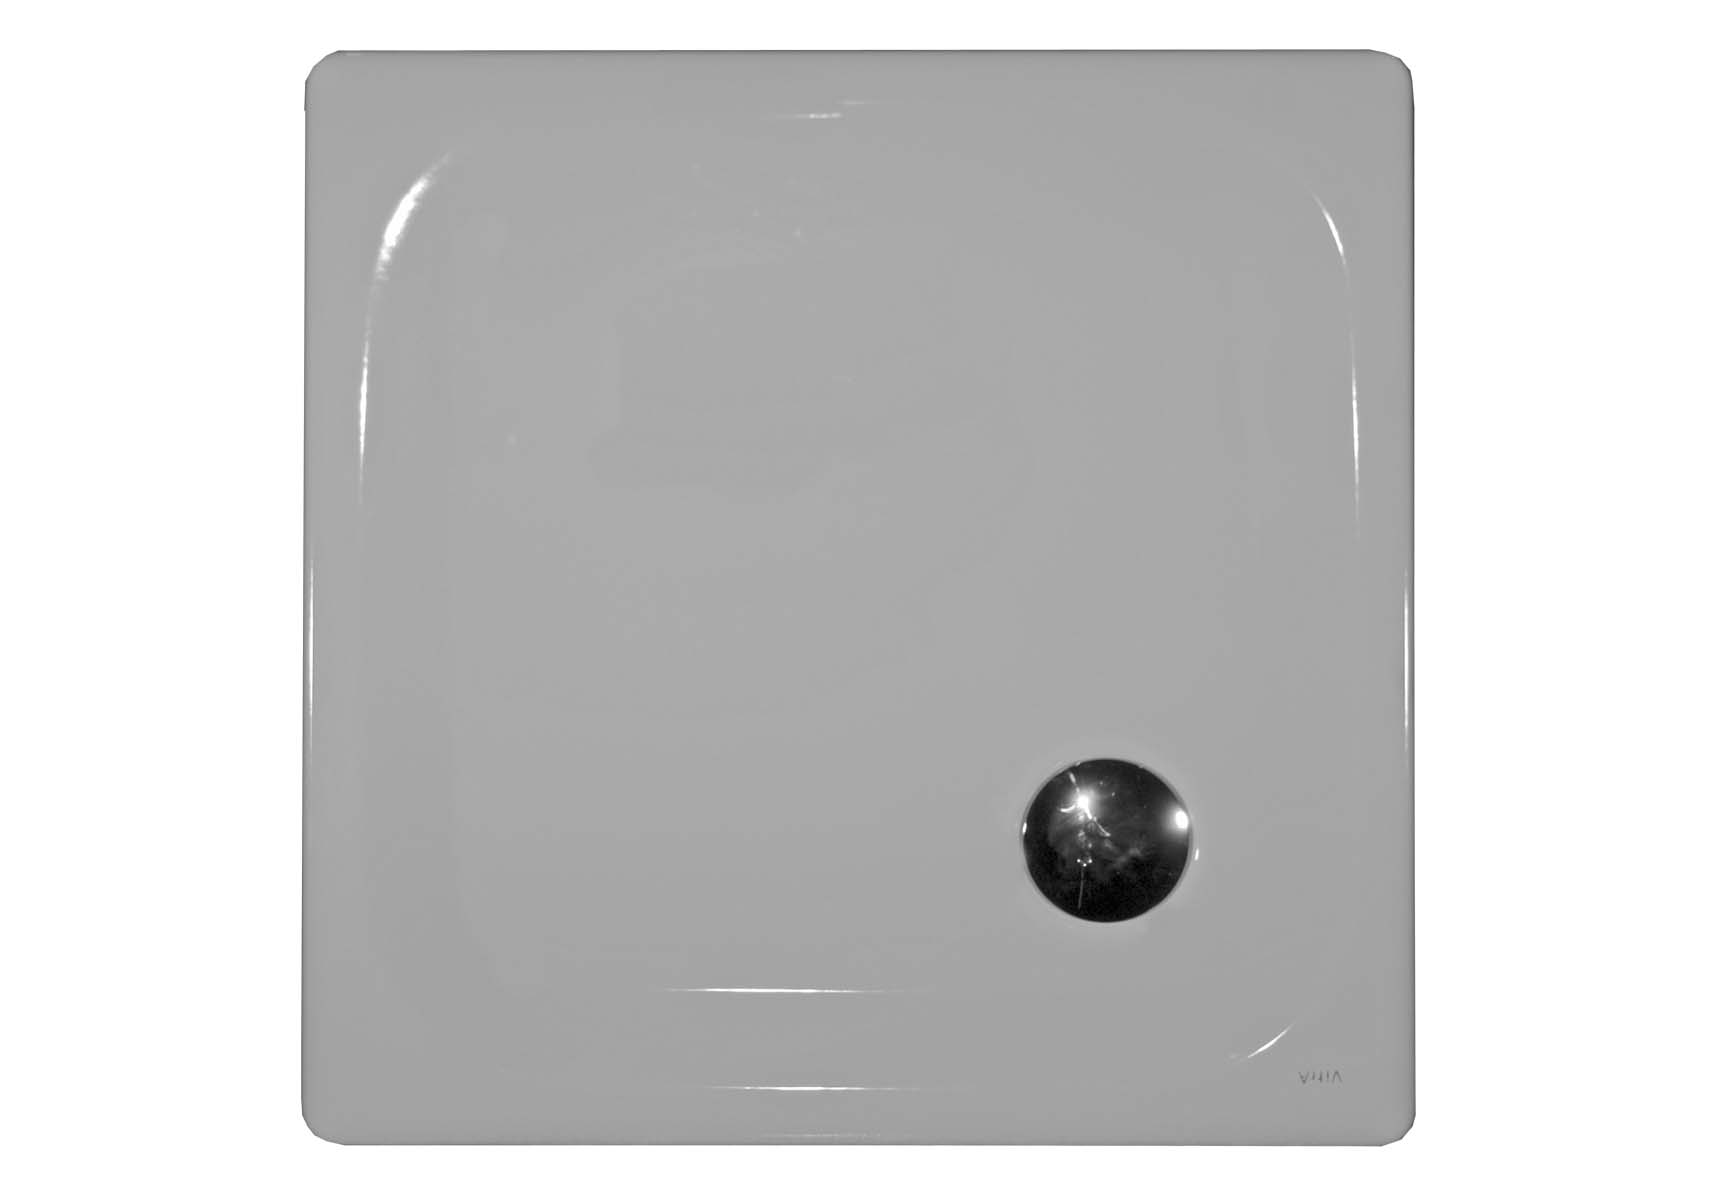 Generic Square 100x100 cm Steel Shower Tray, 3.5 Mm, H:2.5 cm, 90 Mm Waste, Sound Proofing Pad